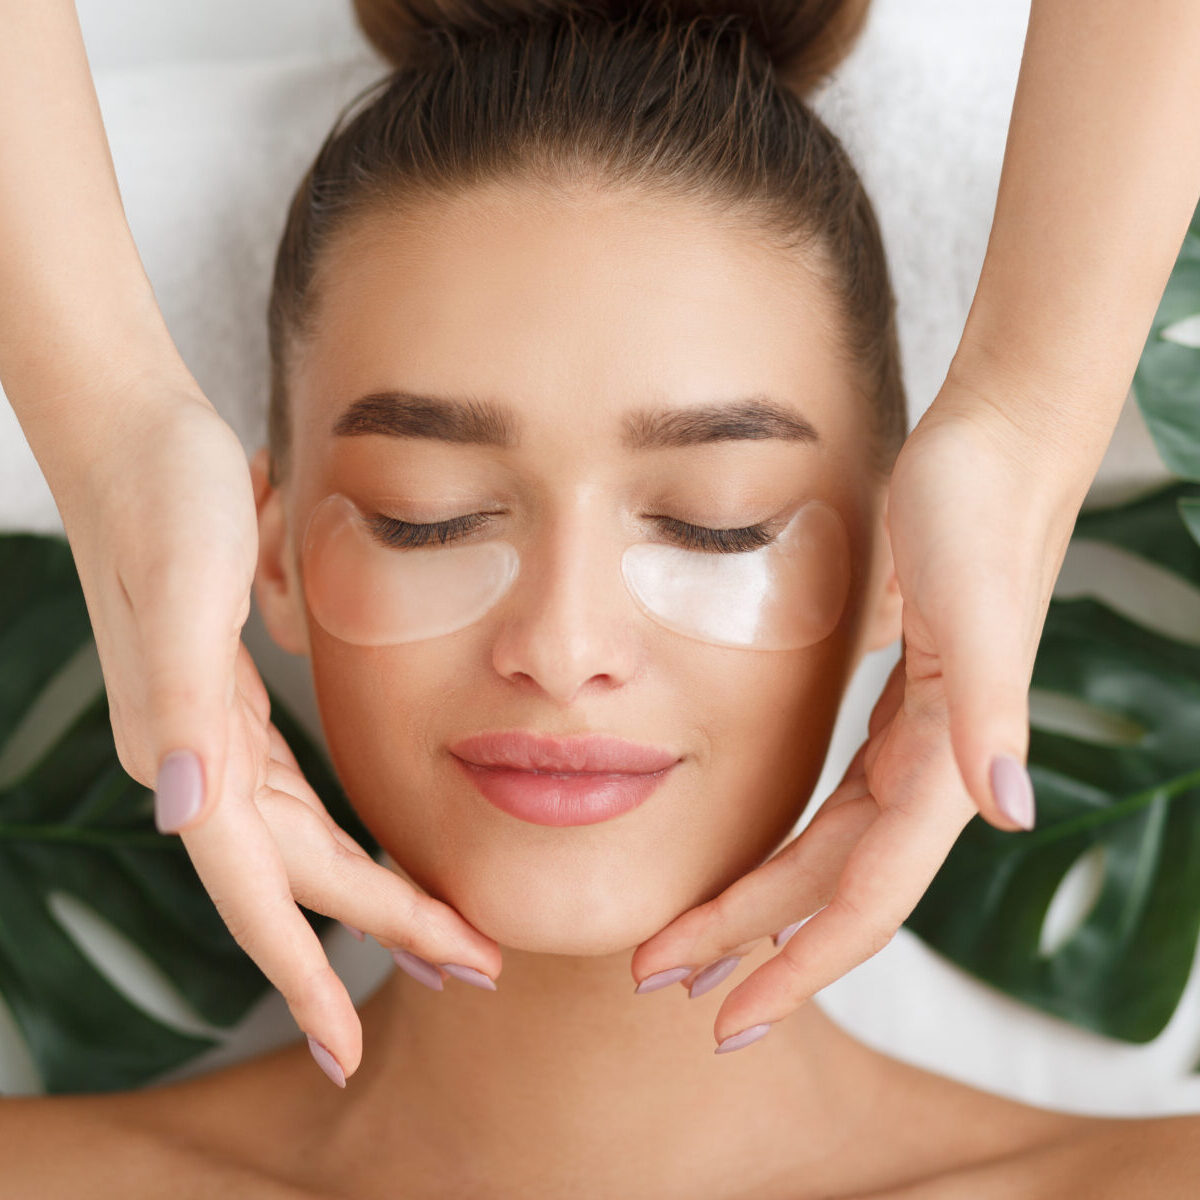 Woman with eye patches having face massage at beauty salon